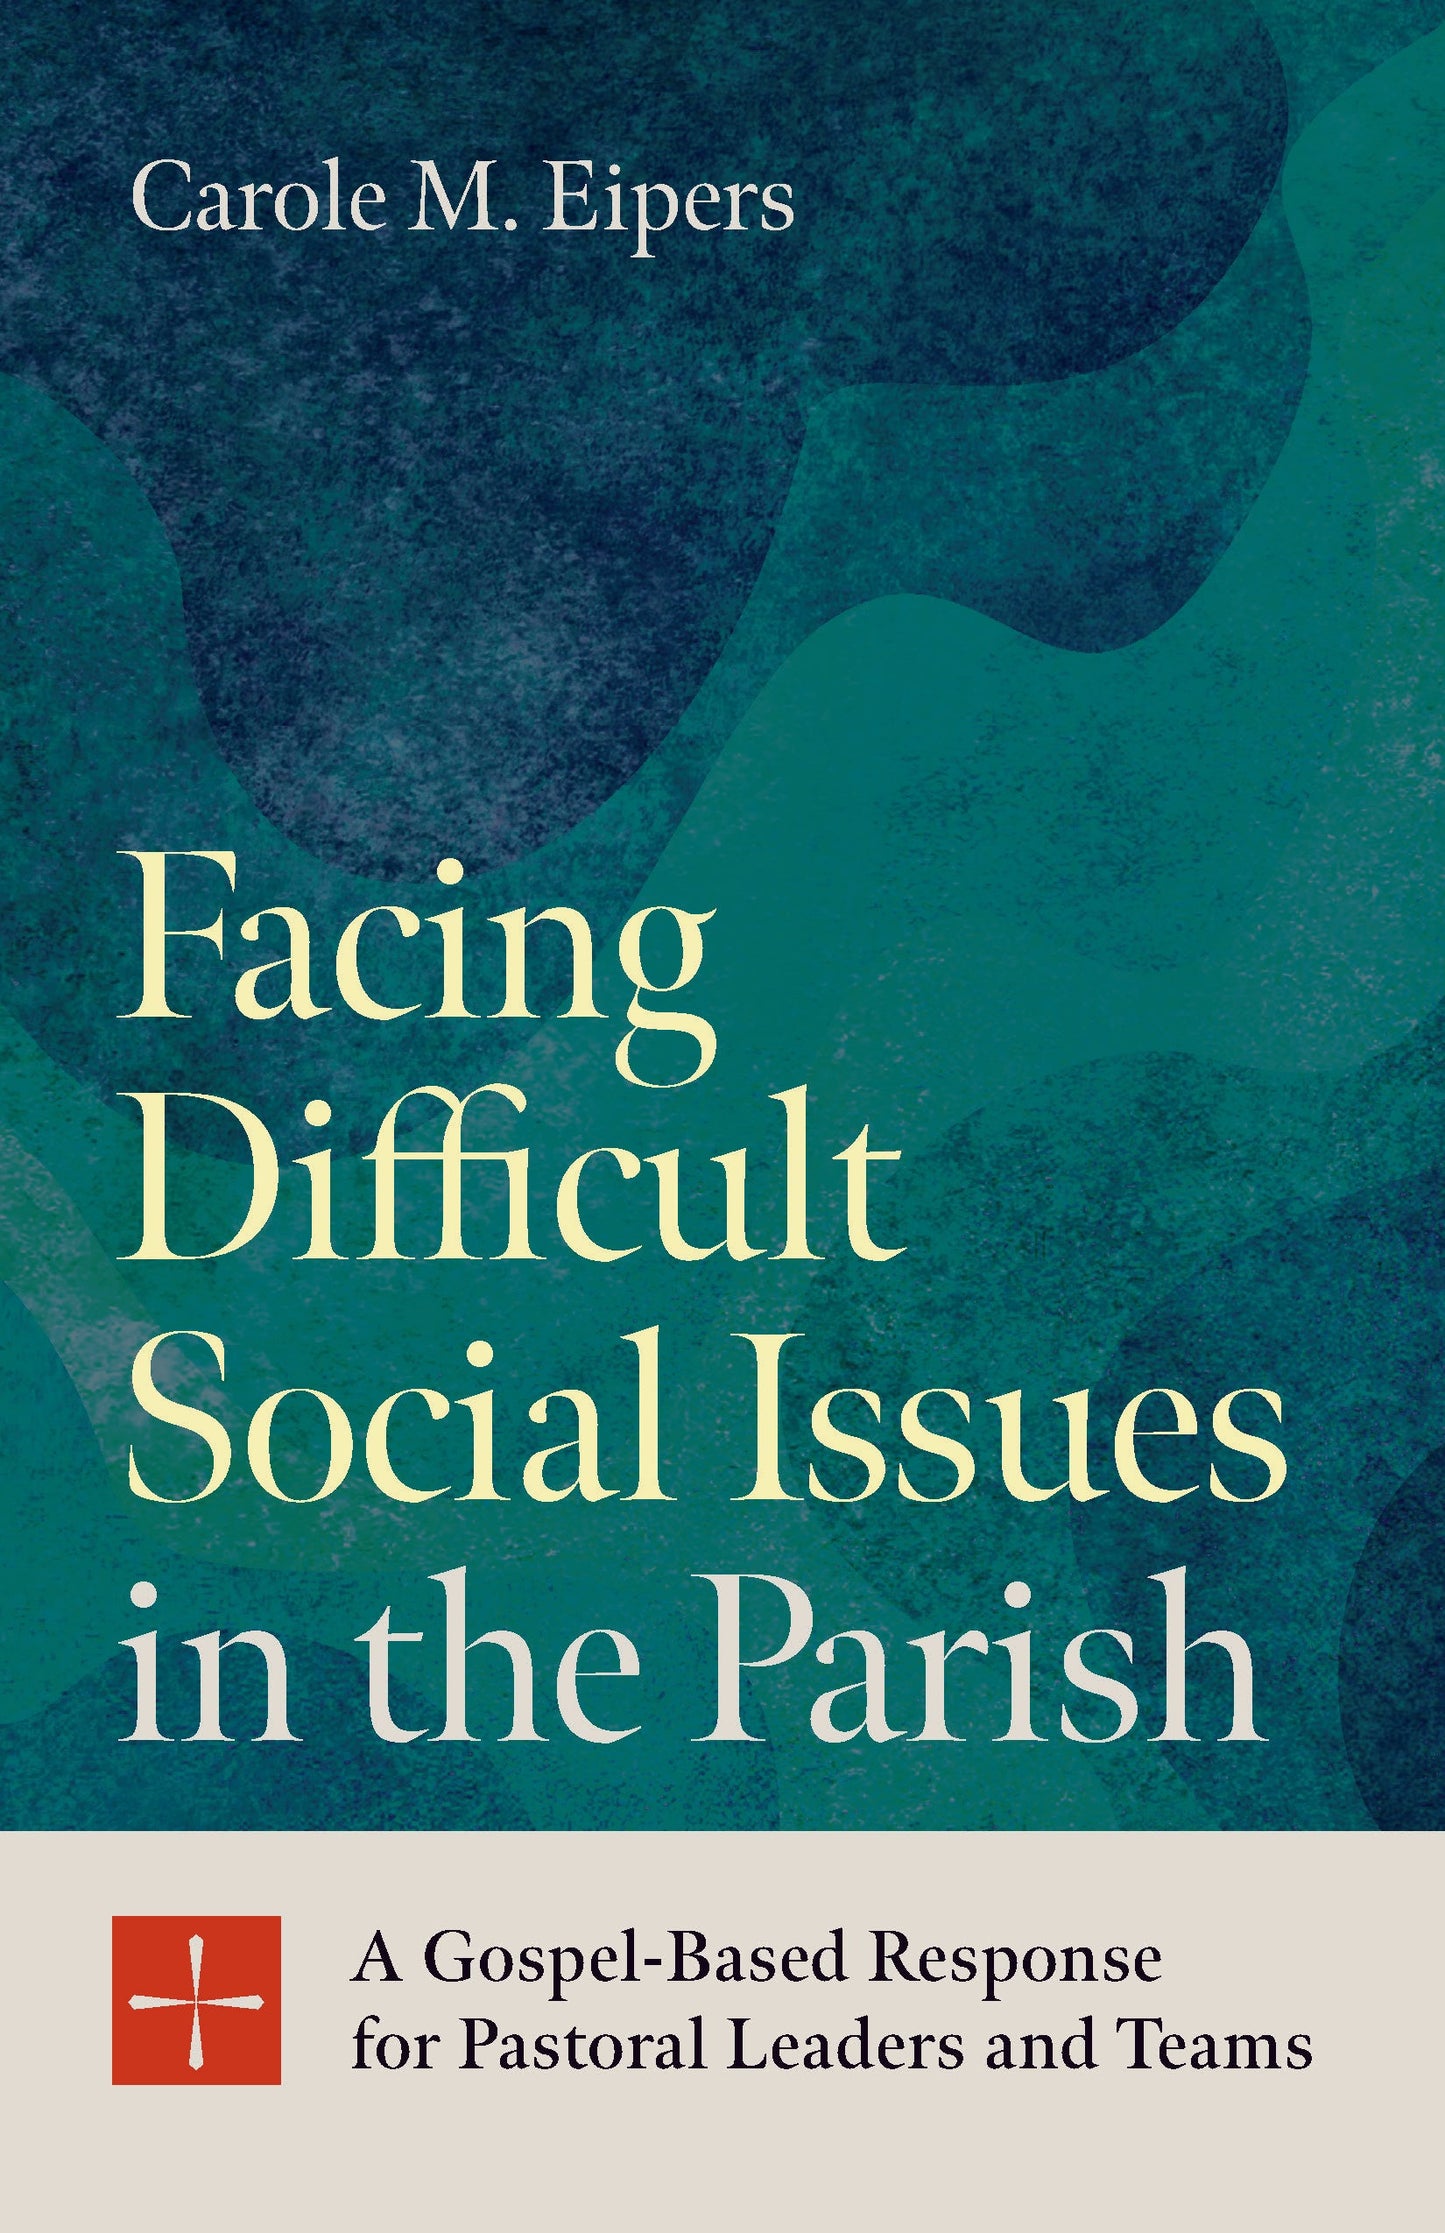 SALE - Facing Difficult Social Issues in the Parish